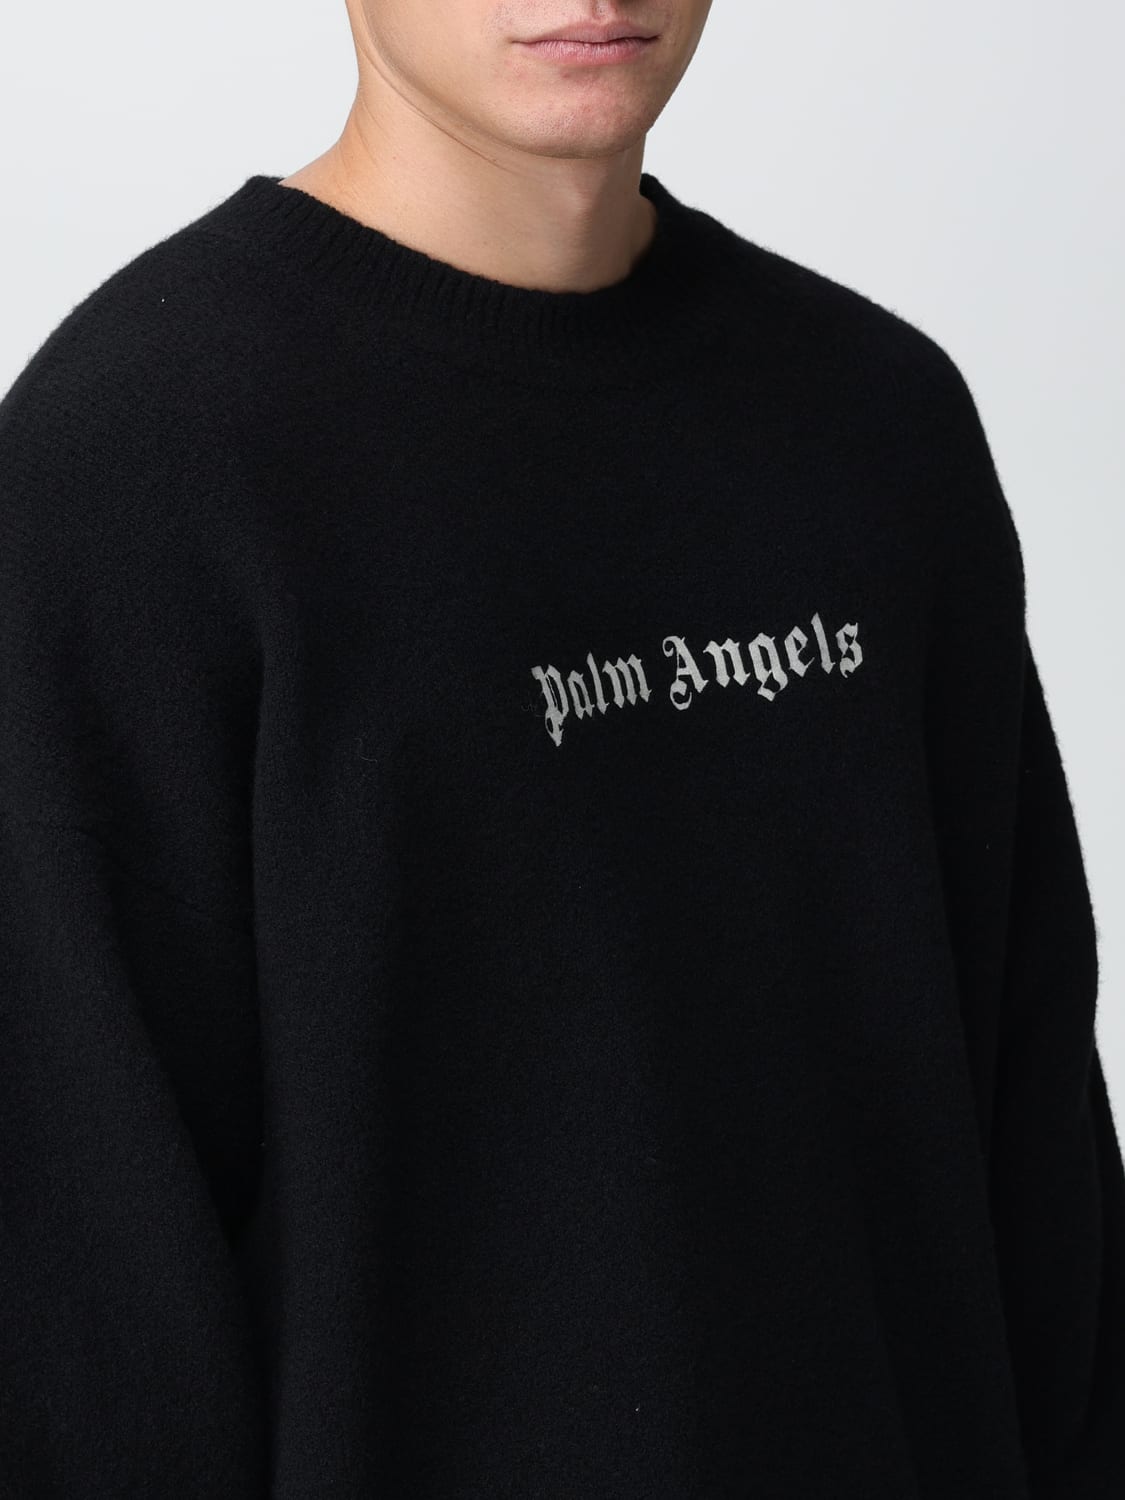 PALM ANGELS: sweater for man - Fuchsia | Palm Angels sweater ...